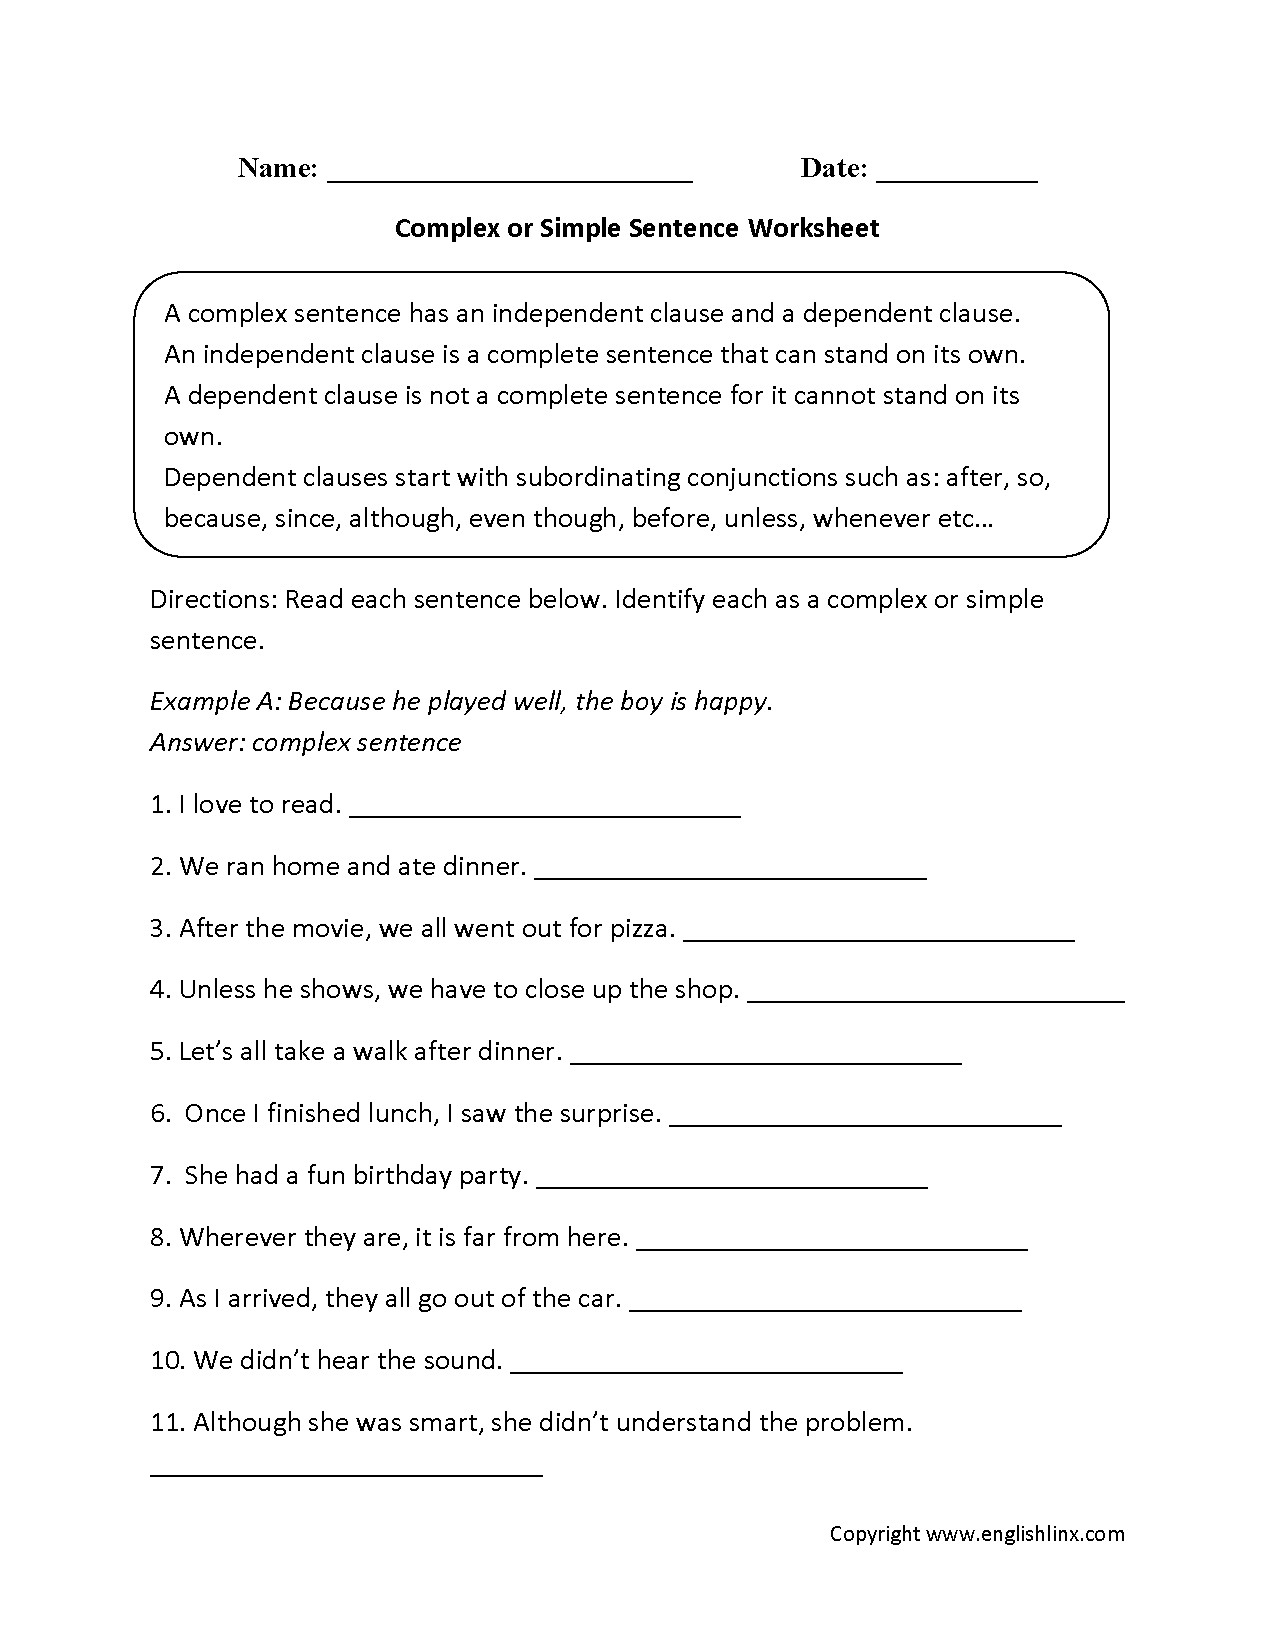 This Old Grammar Trick Still Works! How To Diagram A Sentence - Free Printable Sentence Diagramming Worksheets